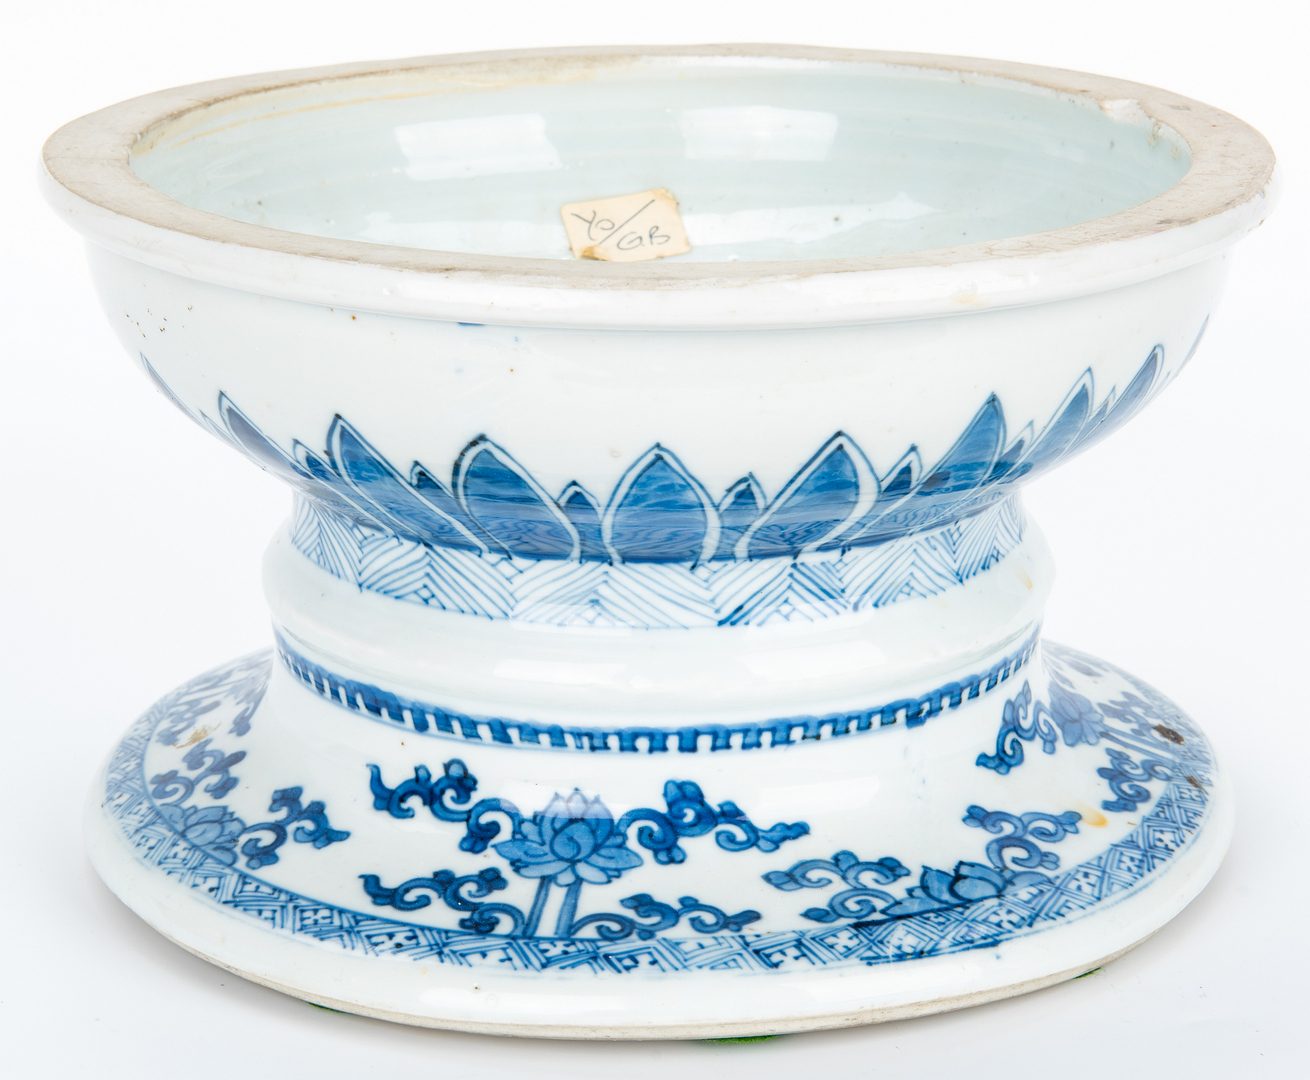 Lot 13: Asian Blue and White Bowls, Pedestal, and Jar, 5 items